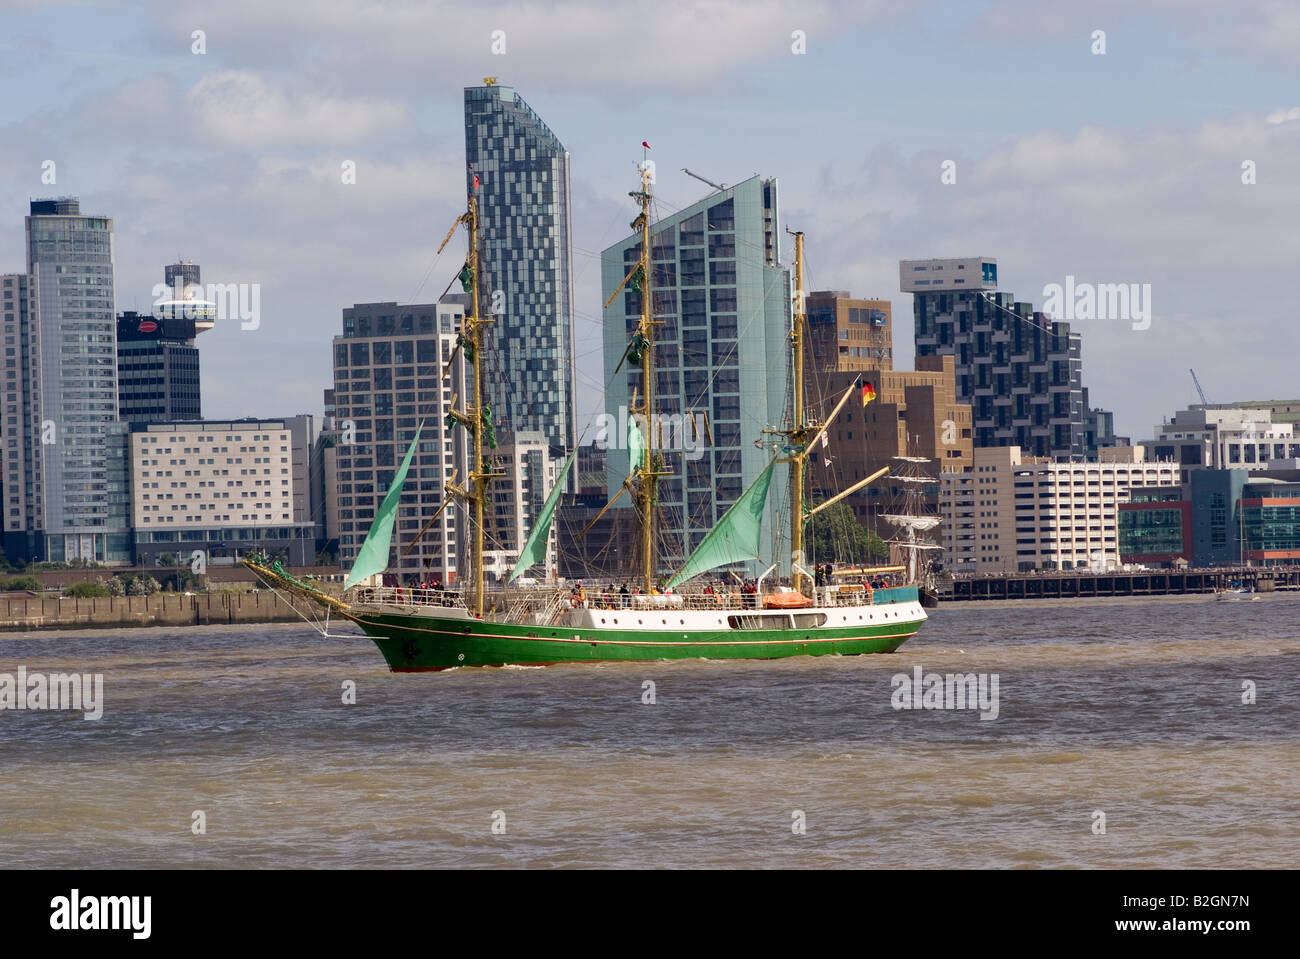 The Tall Ship Alexander Von Humboldt Leaving the River Mersey in Liverpool at the Start of the Tall Ships Race England 2008 Stock Photo